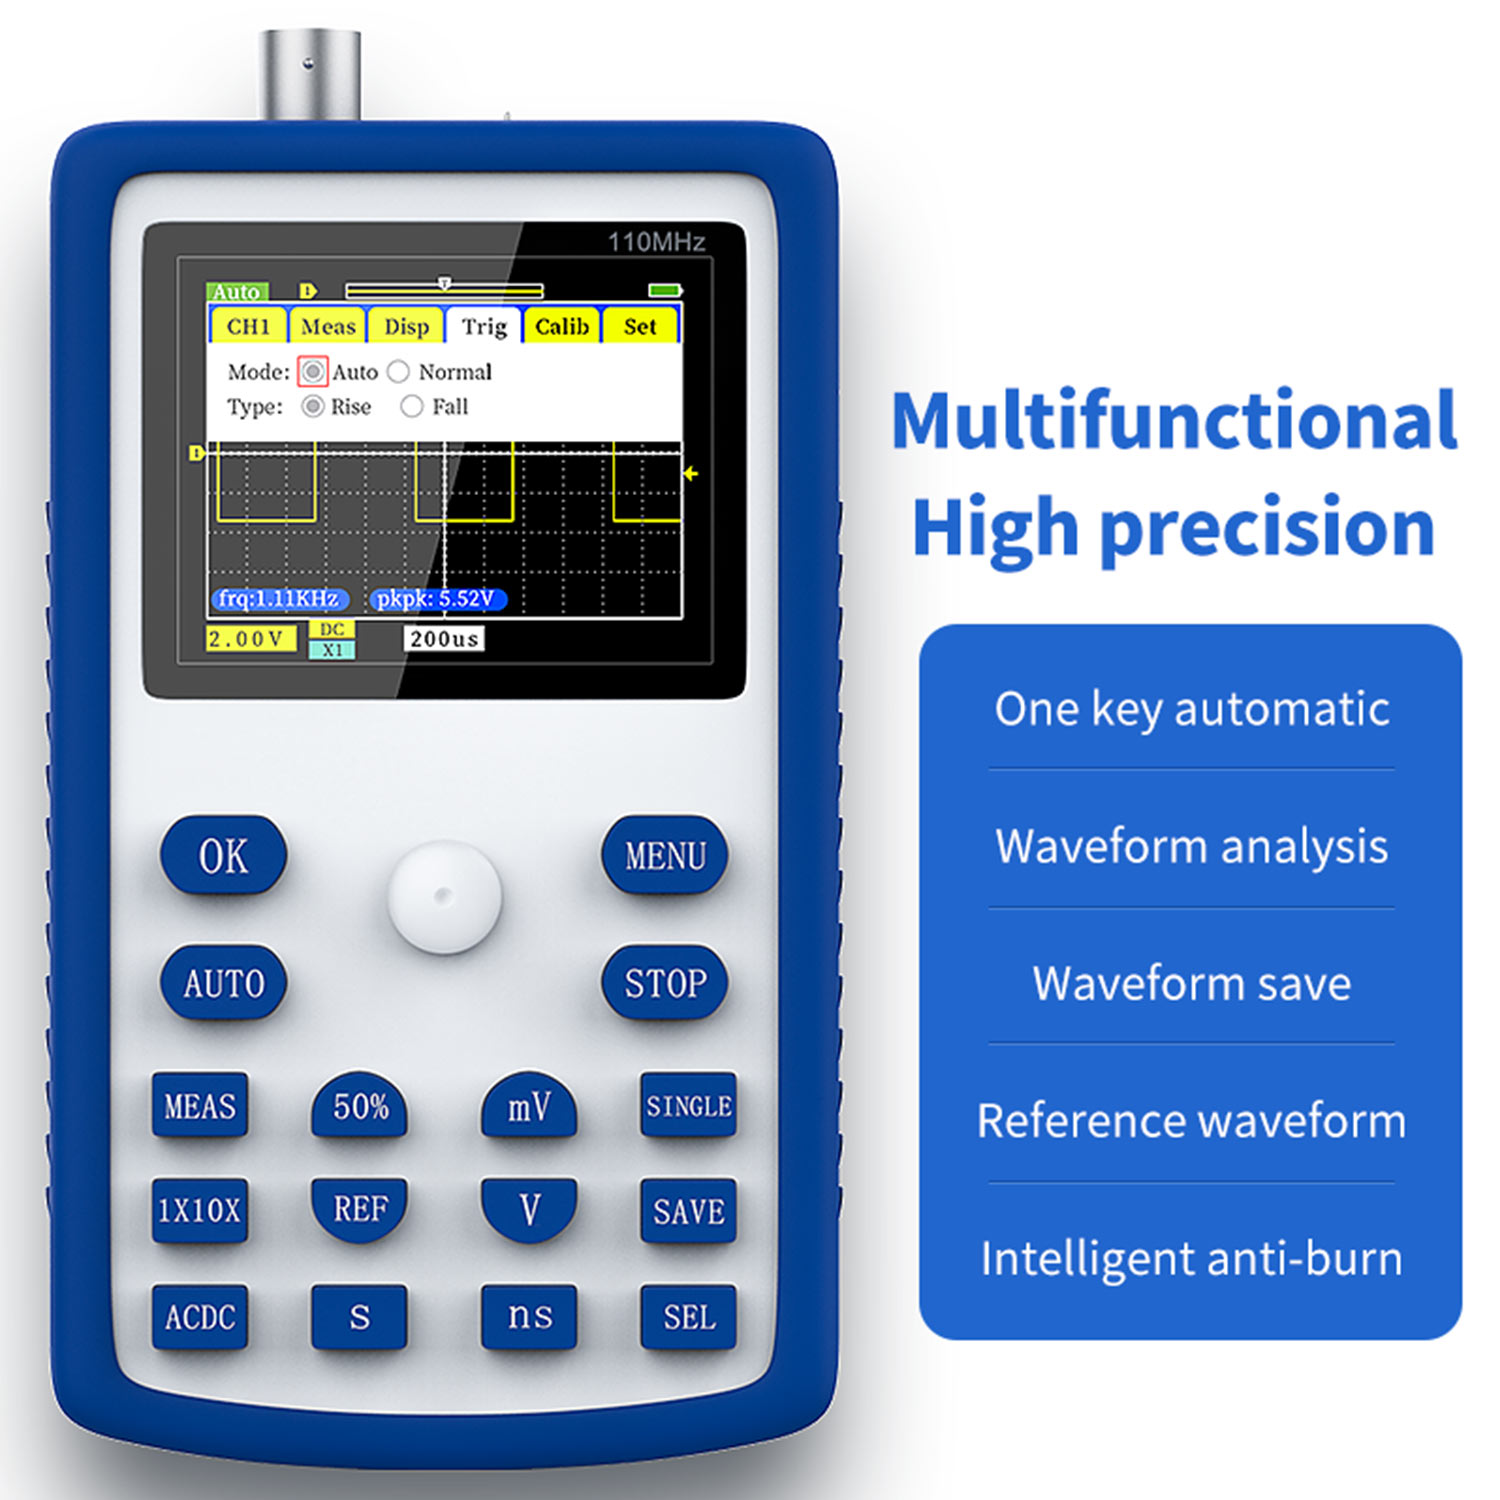 C15 2.4 Inch Screen Digital Oscilloscope 500MS/S Sampling Rate with 110MHz Bandwidth 1KHz/3.3V Calibration Square Wave